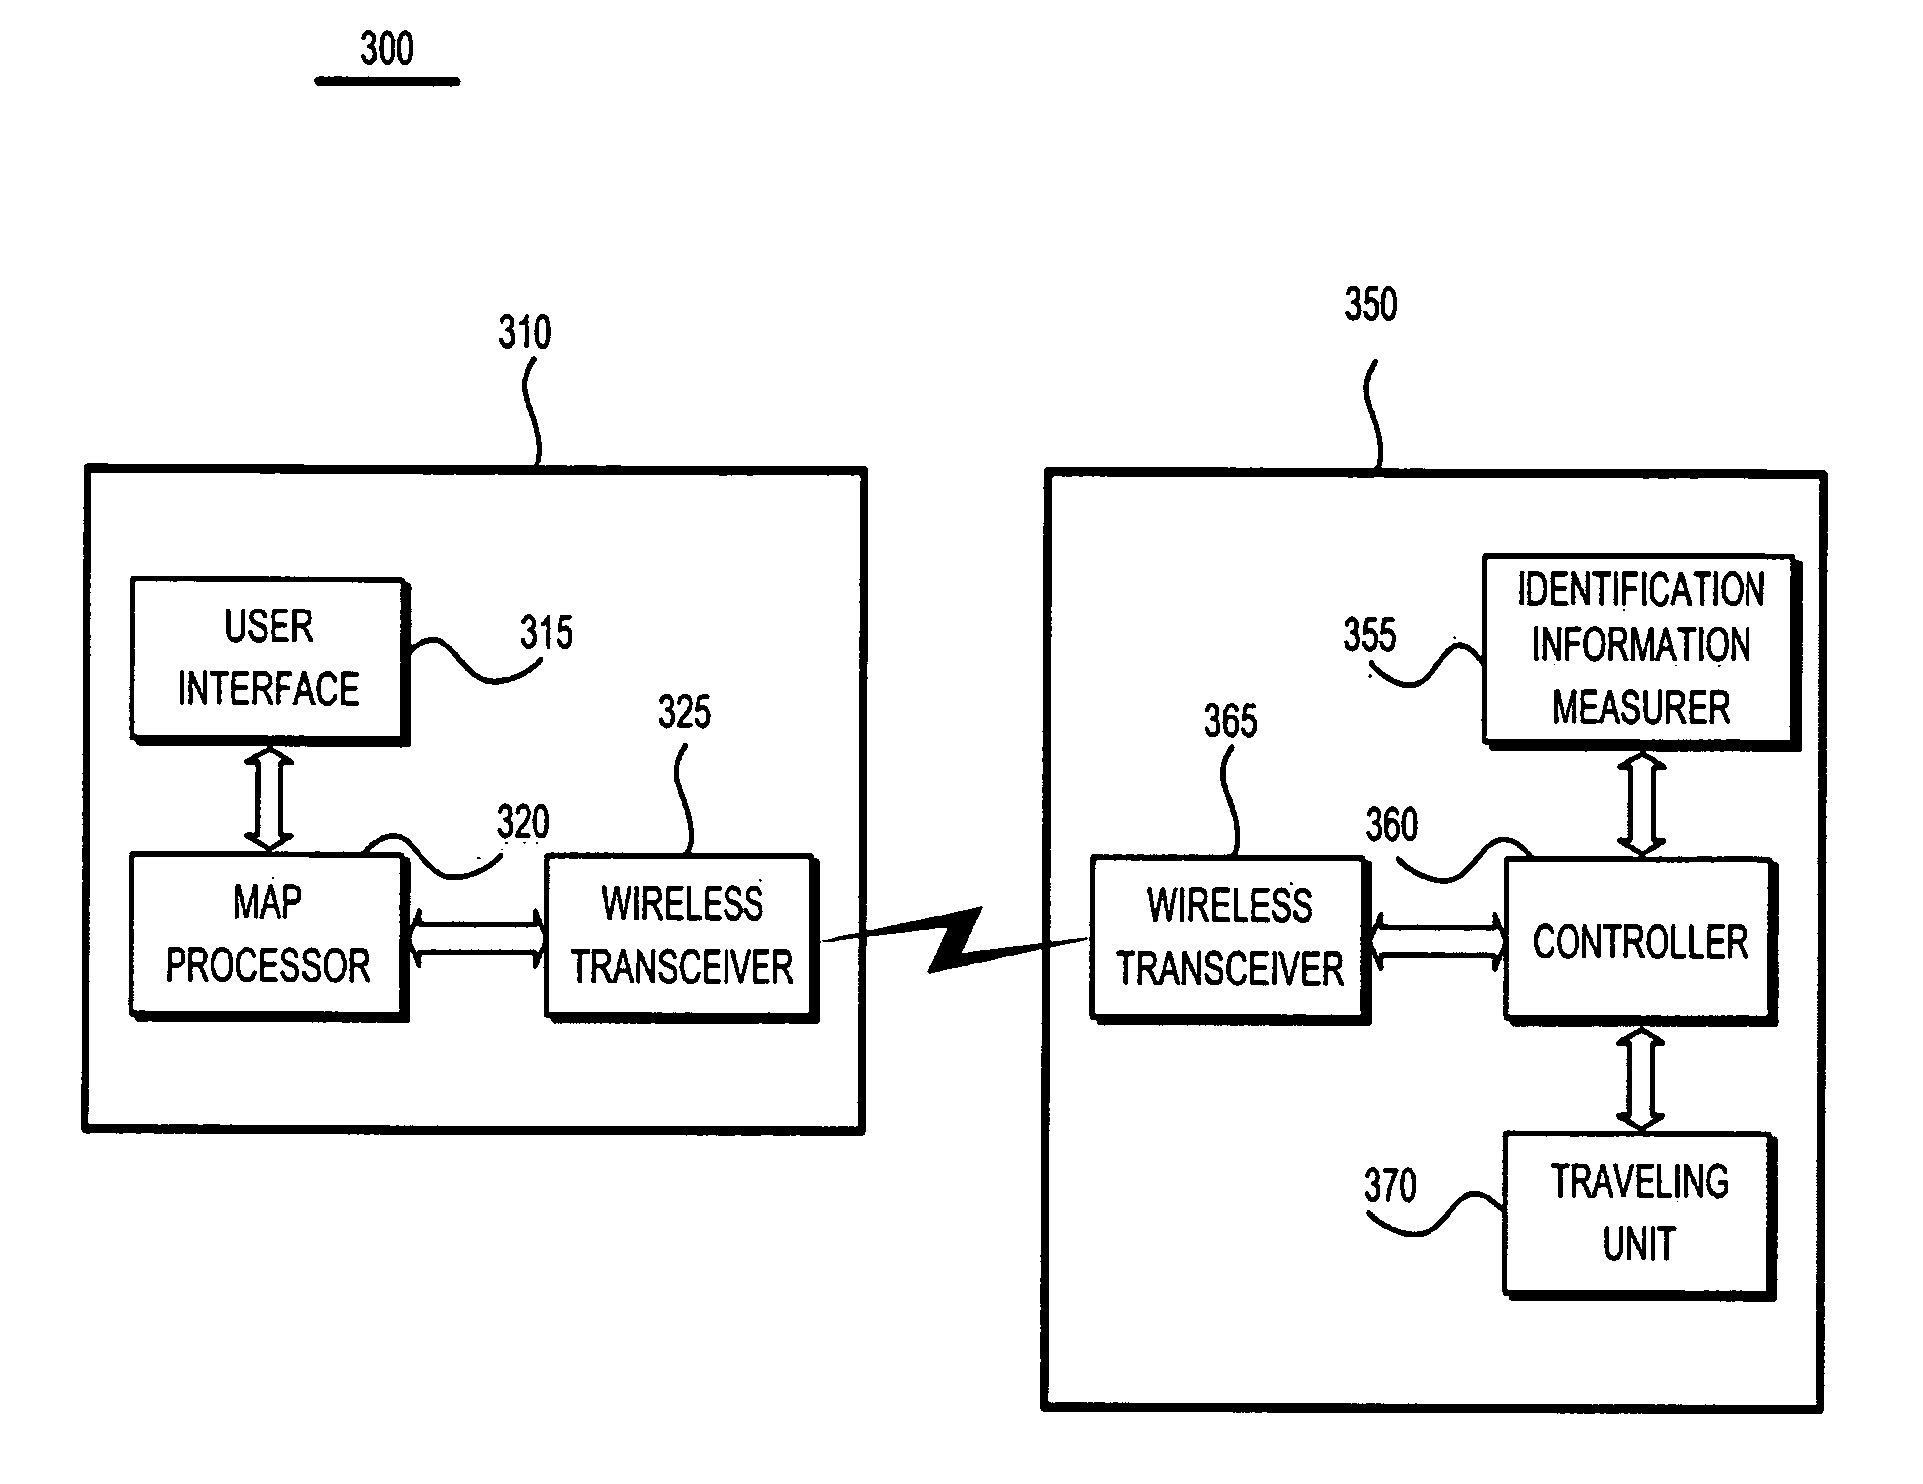 System and method for identifying objects in a space